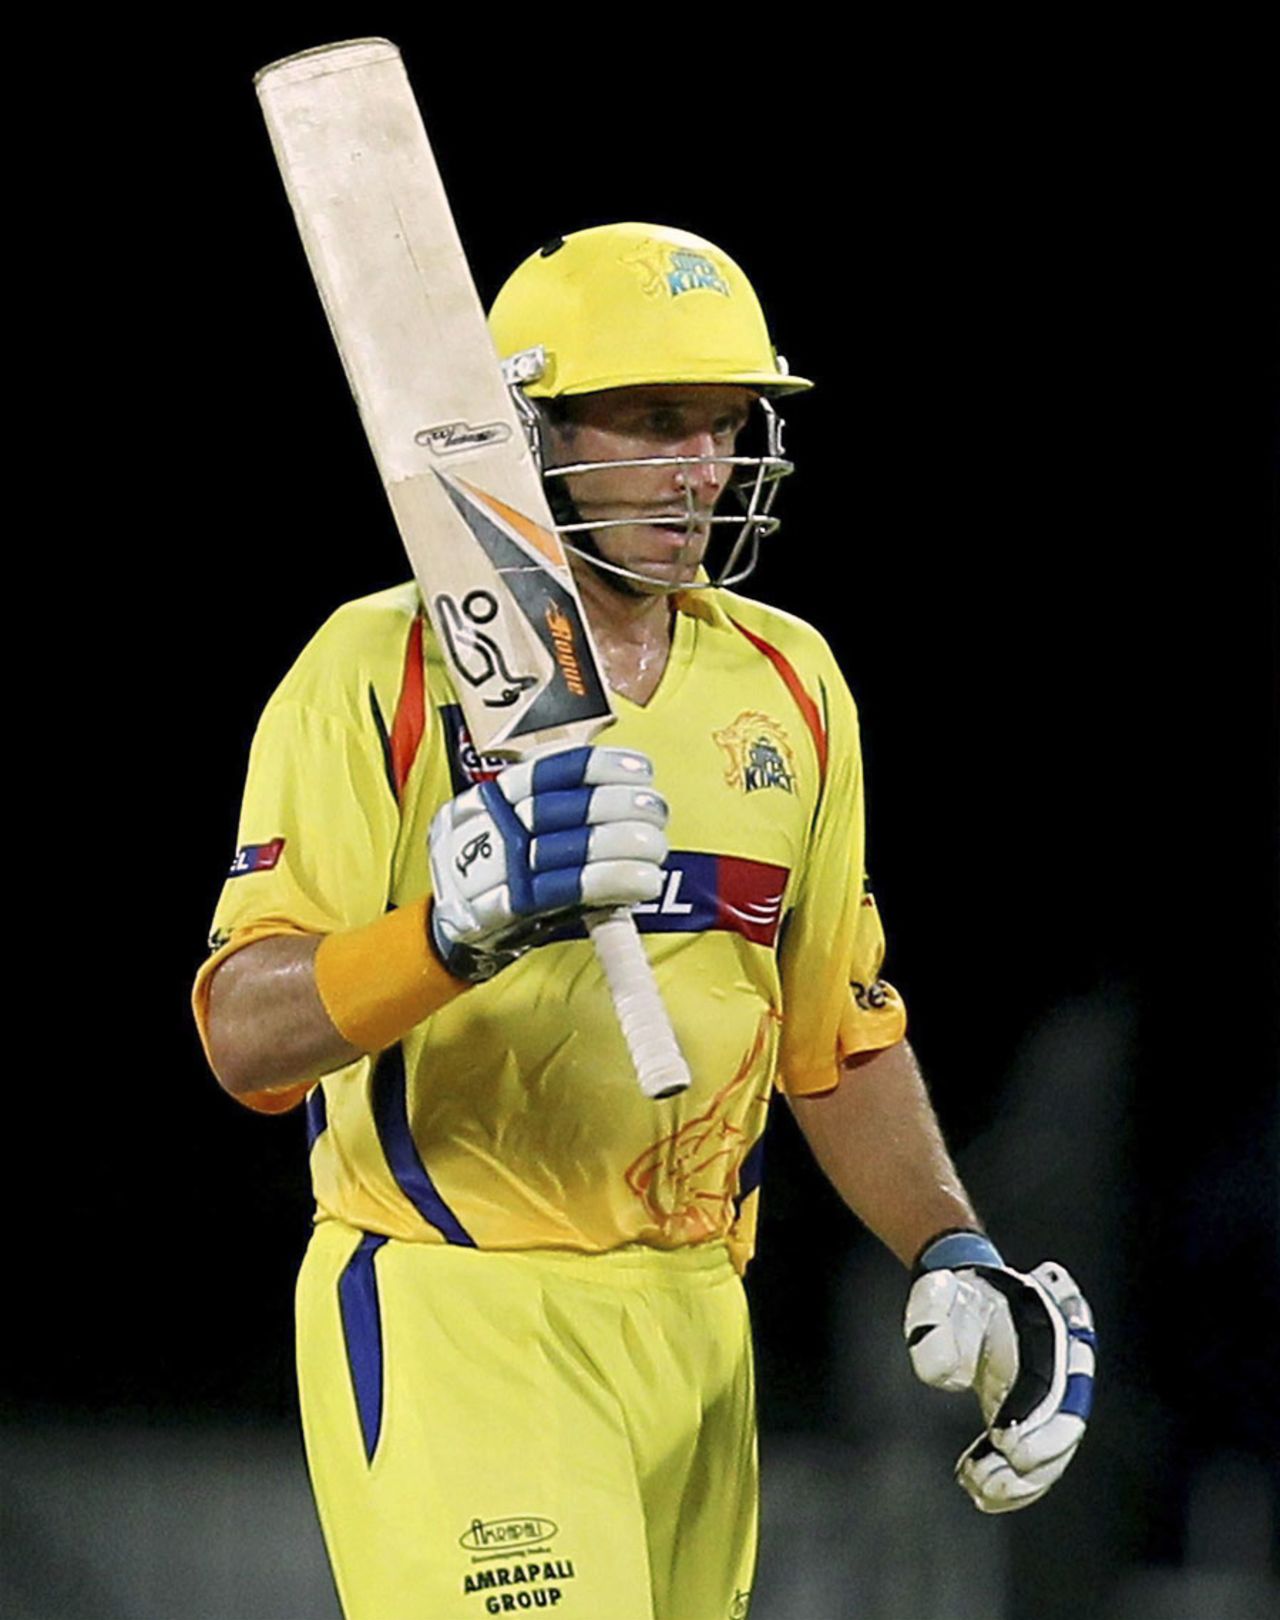 Michael Hussey acknowledges the applause for his half-century, Chennai Super Kings v Pune Warriors, IPL 2011, Chennai